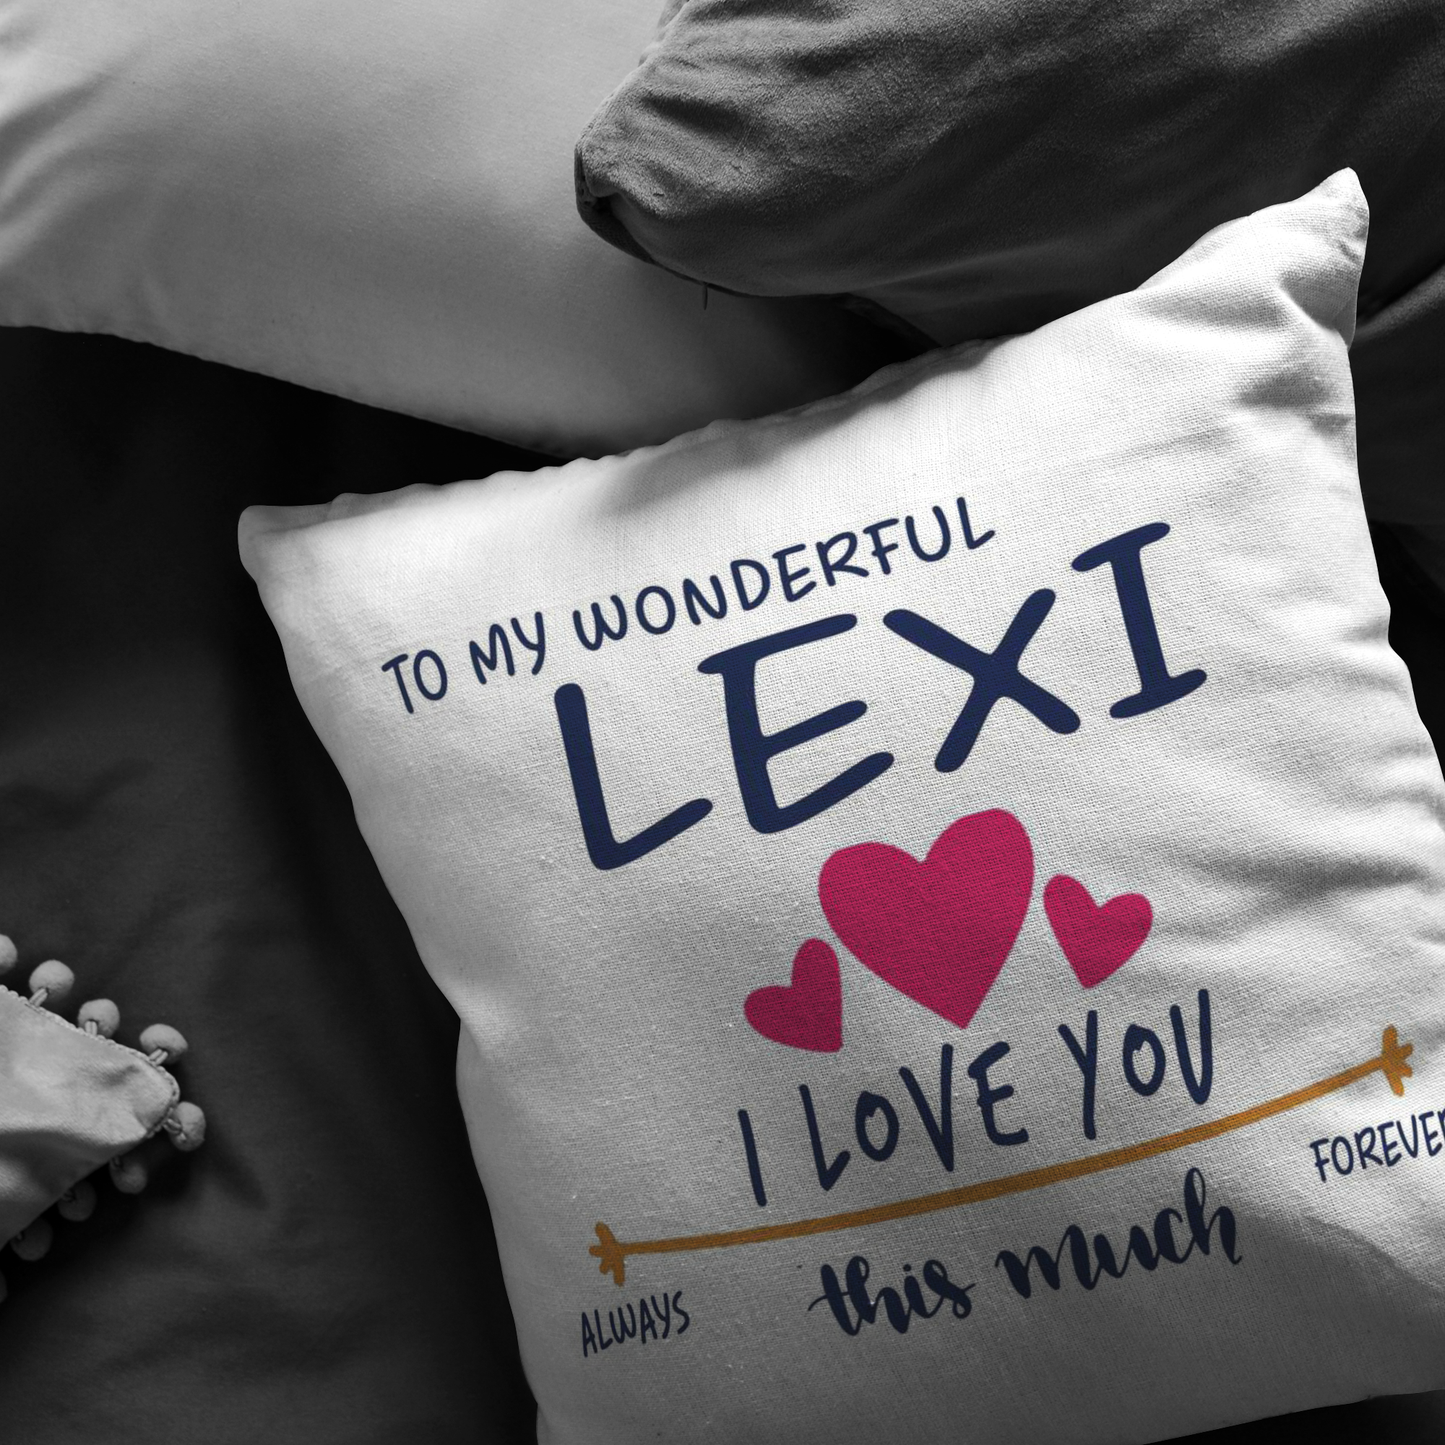 PL-21251989-sp-39937 - [ Lexi | 1 | 1 ] (PI_ThrowPillowCovers) Valentines Day Pillow Covers 18x18 - to My Wonderful Lexi I